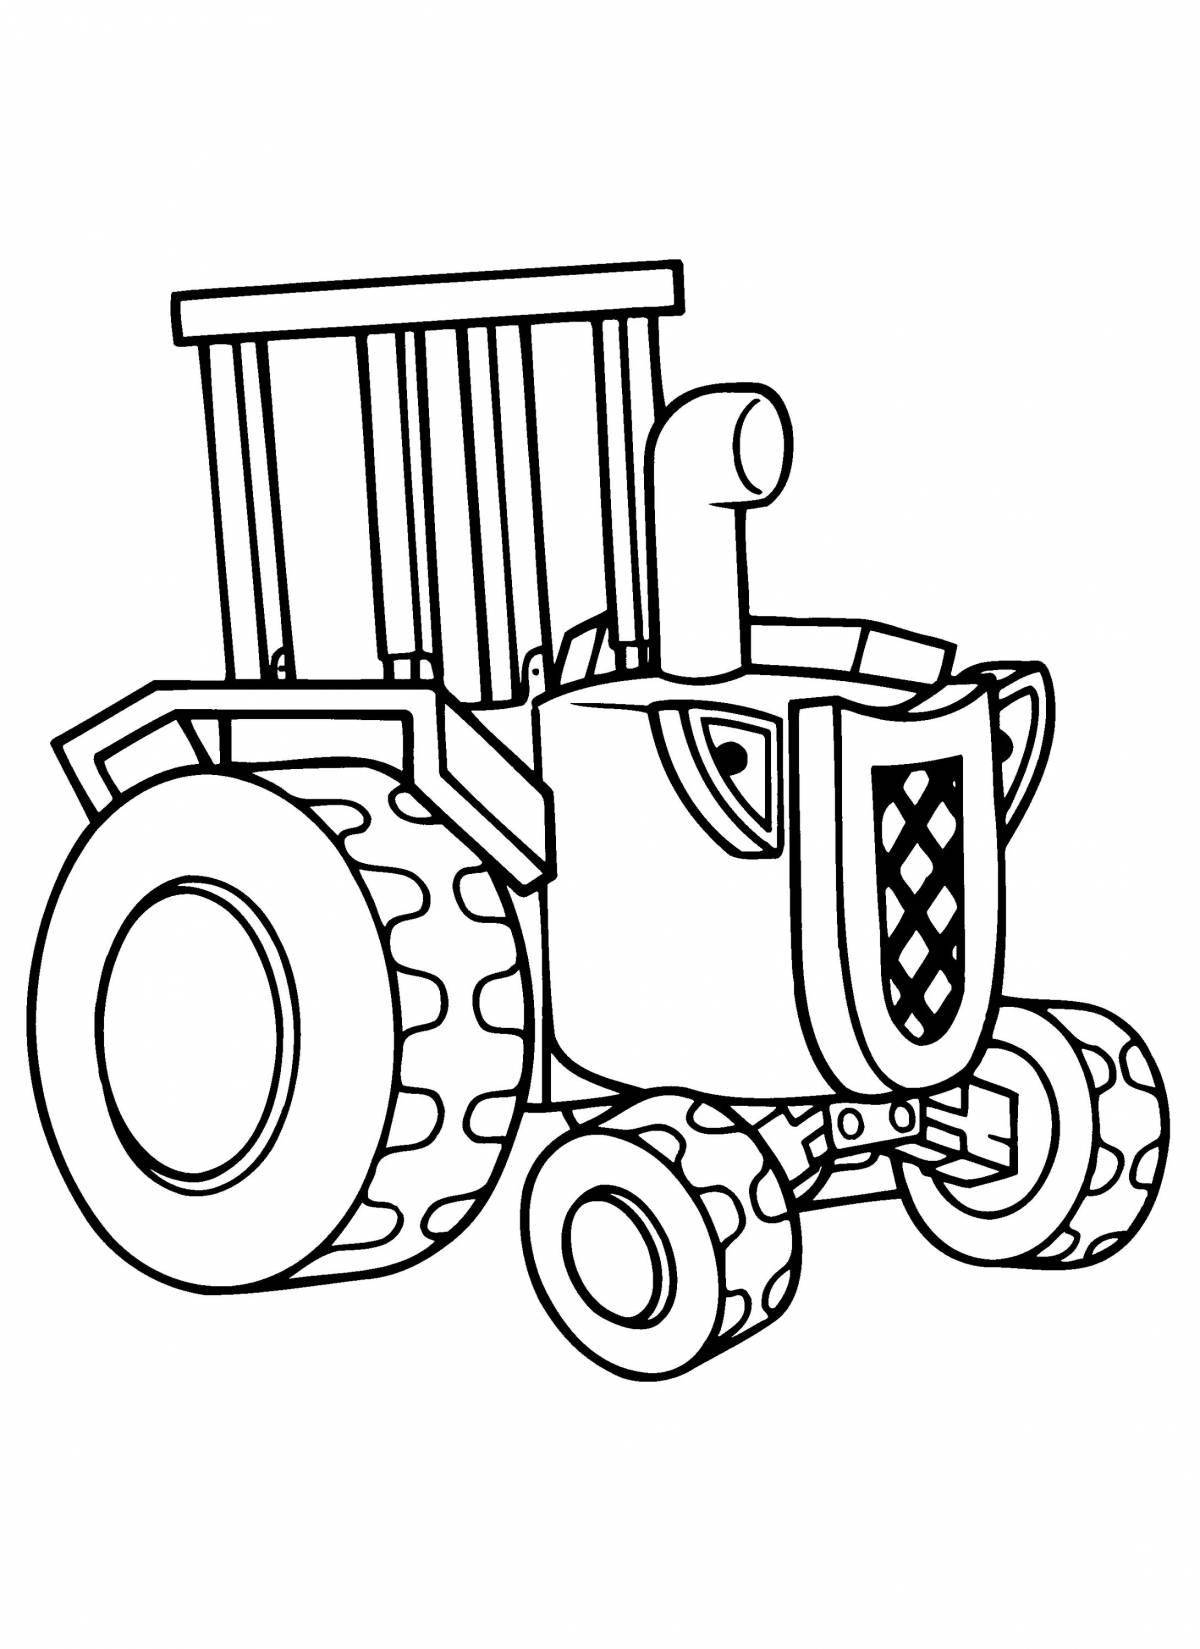 Coloring book funny tractor with a barrel